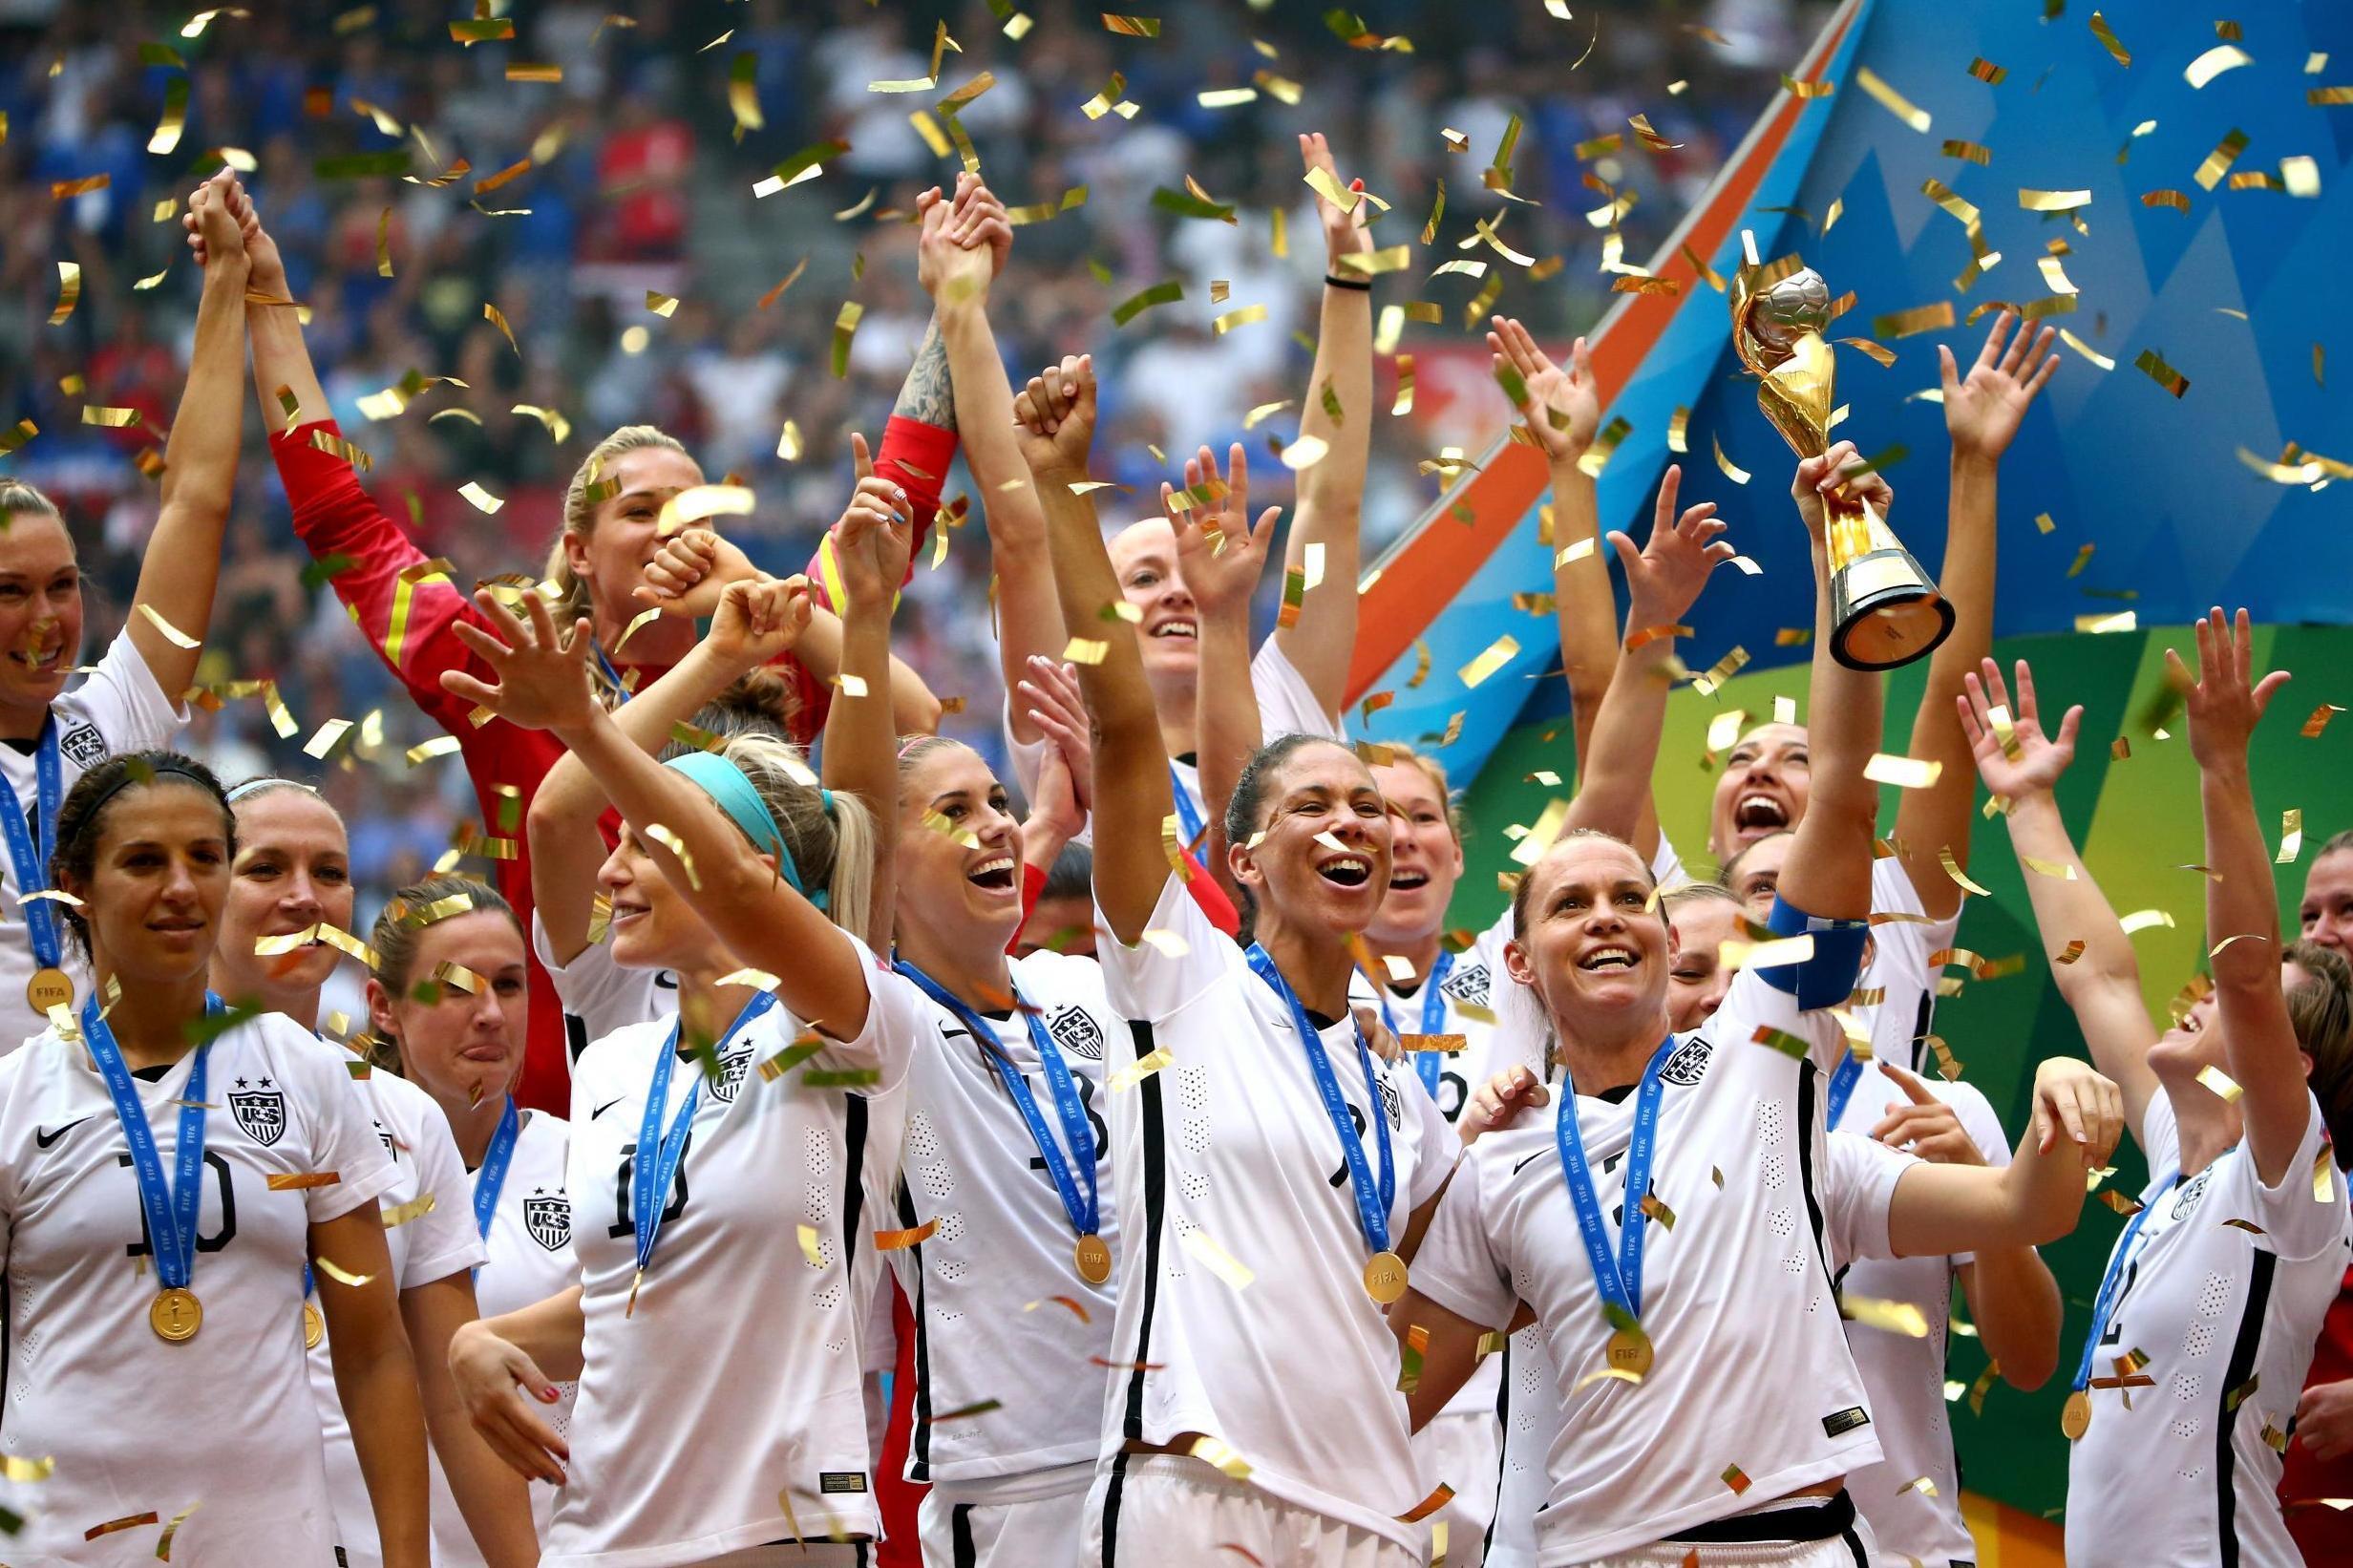 Secret deodorant pledges thousands to support US Women's soccer team in fighting pay gap (Getty)